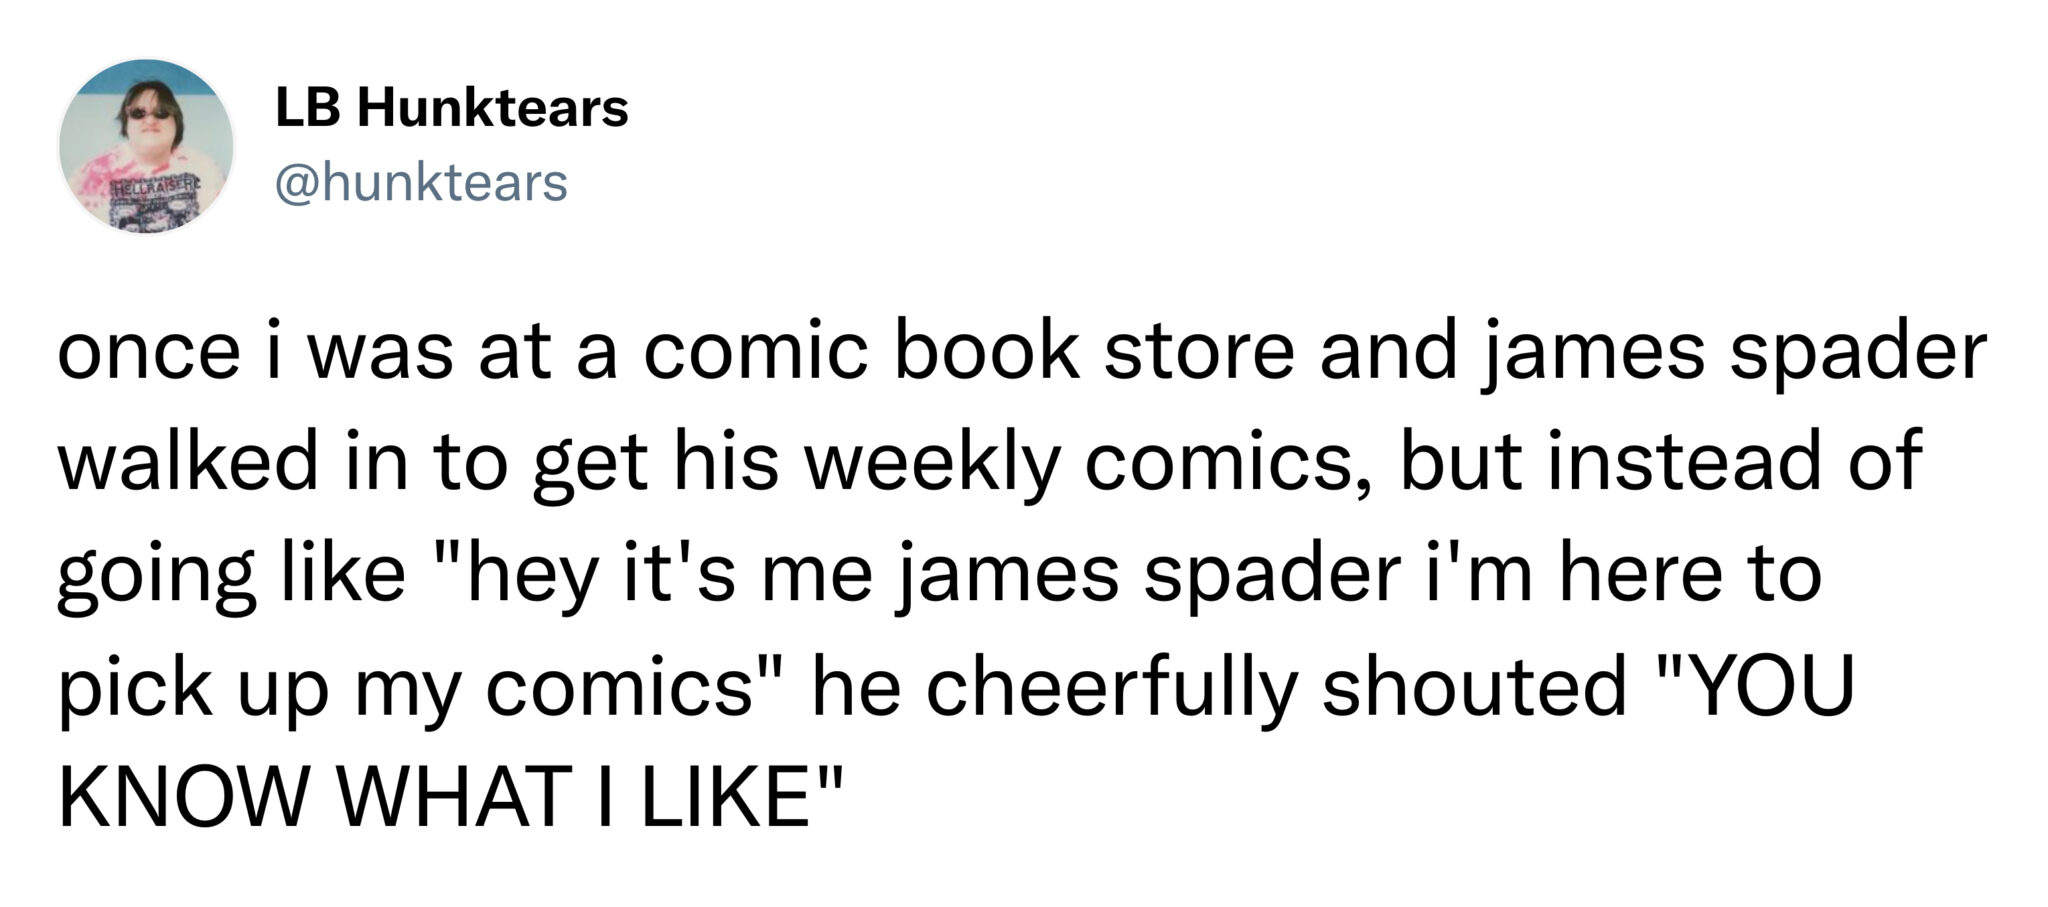 funny tweets and memes -  angle - Lb Hunktears Hellraiseric once i was at a comic book store and james spader walked in to get his weekly comics, but instead of going "hey it's me james spader i'm here to pick up my comics" he cheerfully shouted "You Know